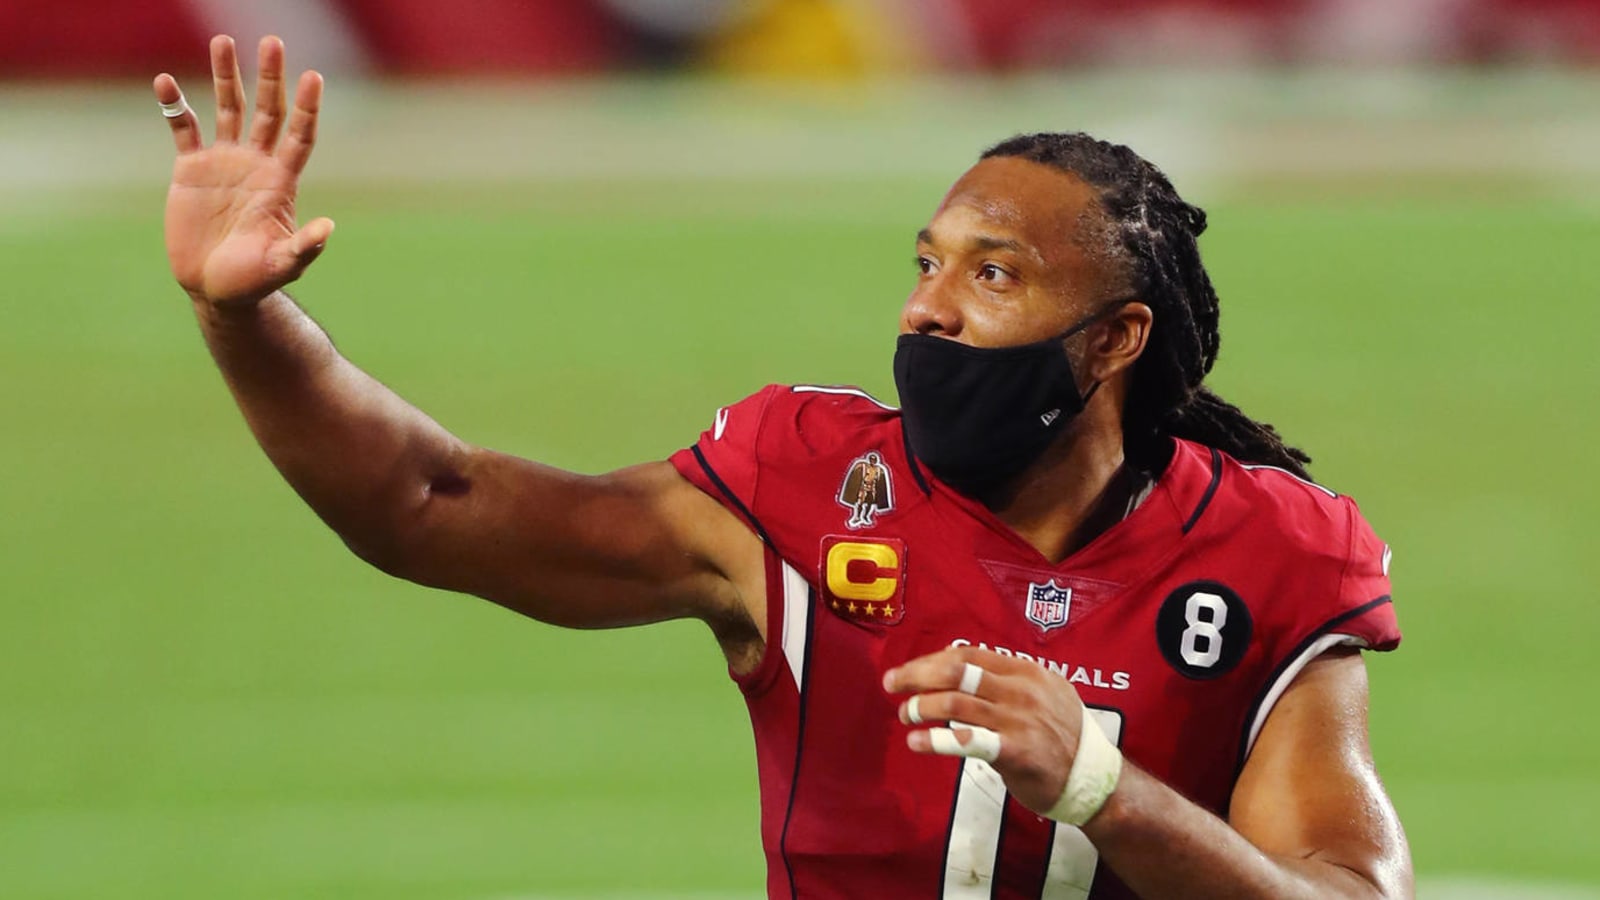 Former teammate hints at whether Larry Fitzgerald will play or retire in 2021